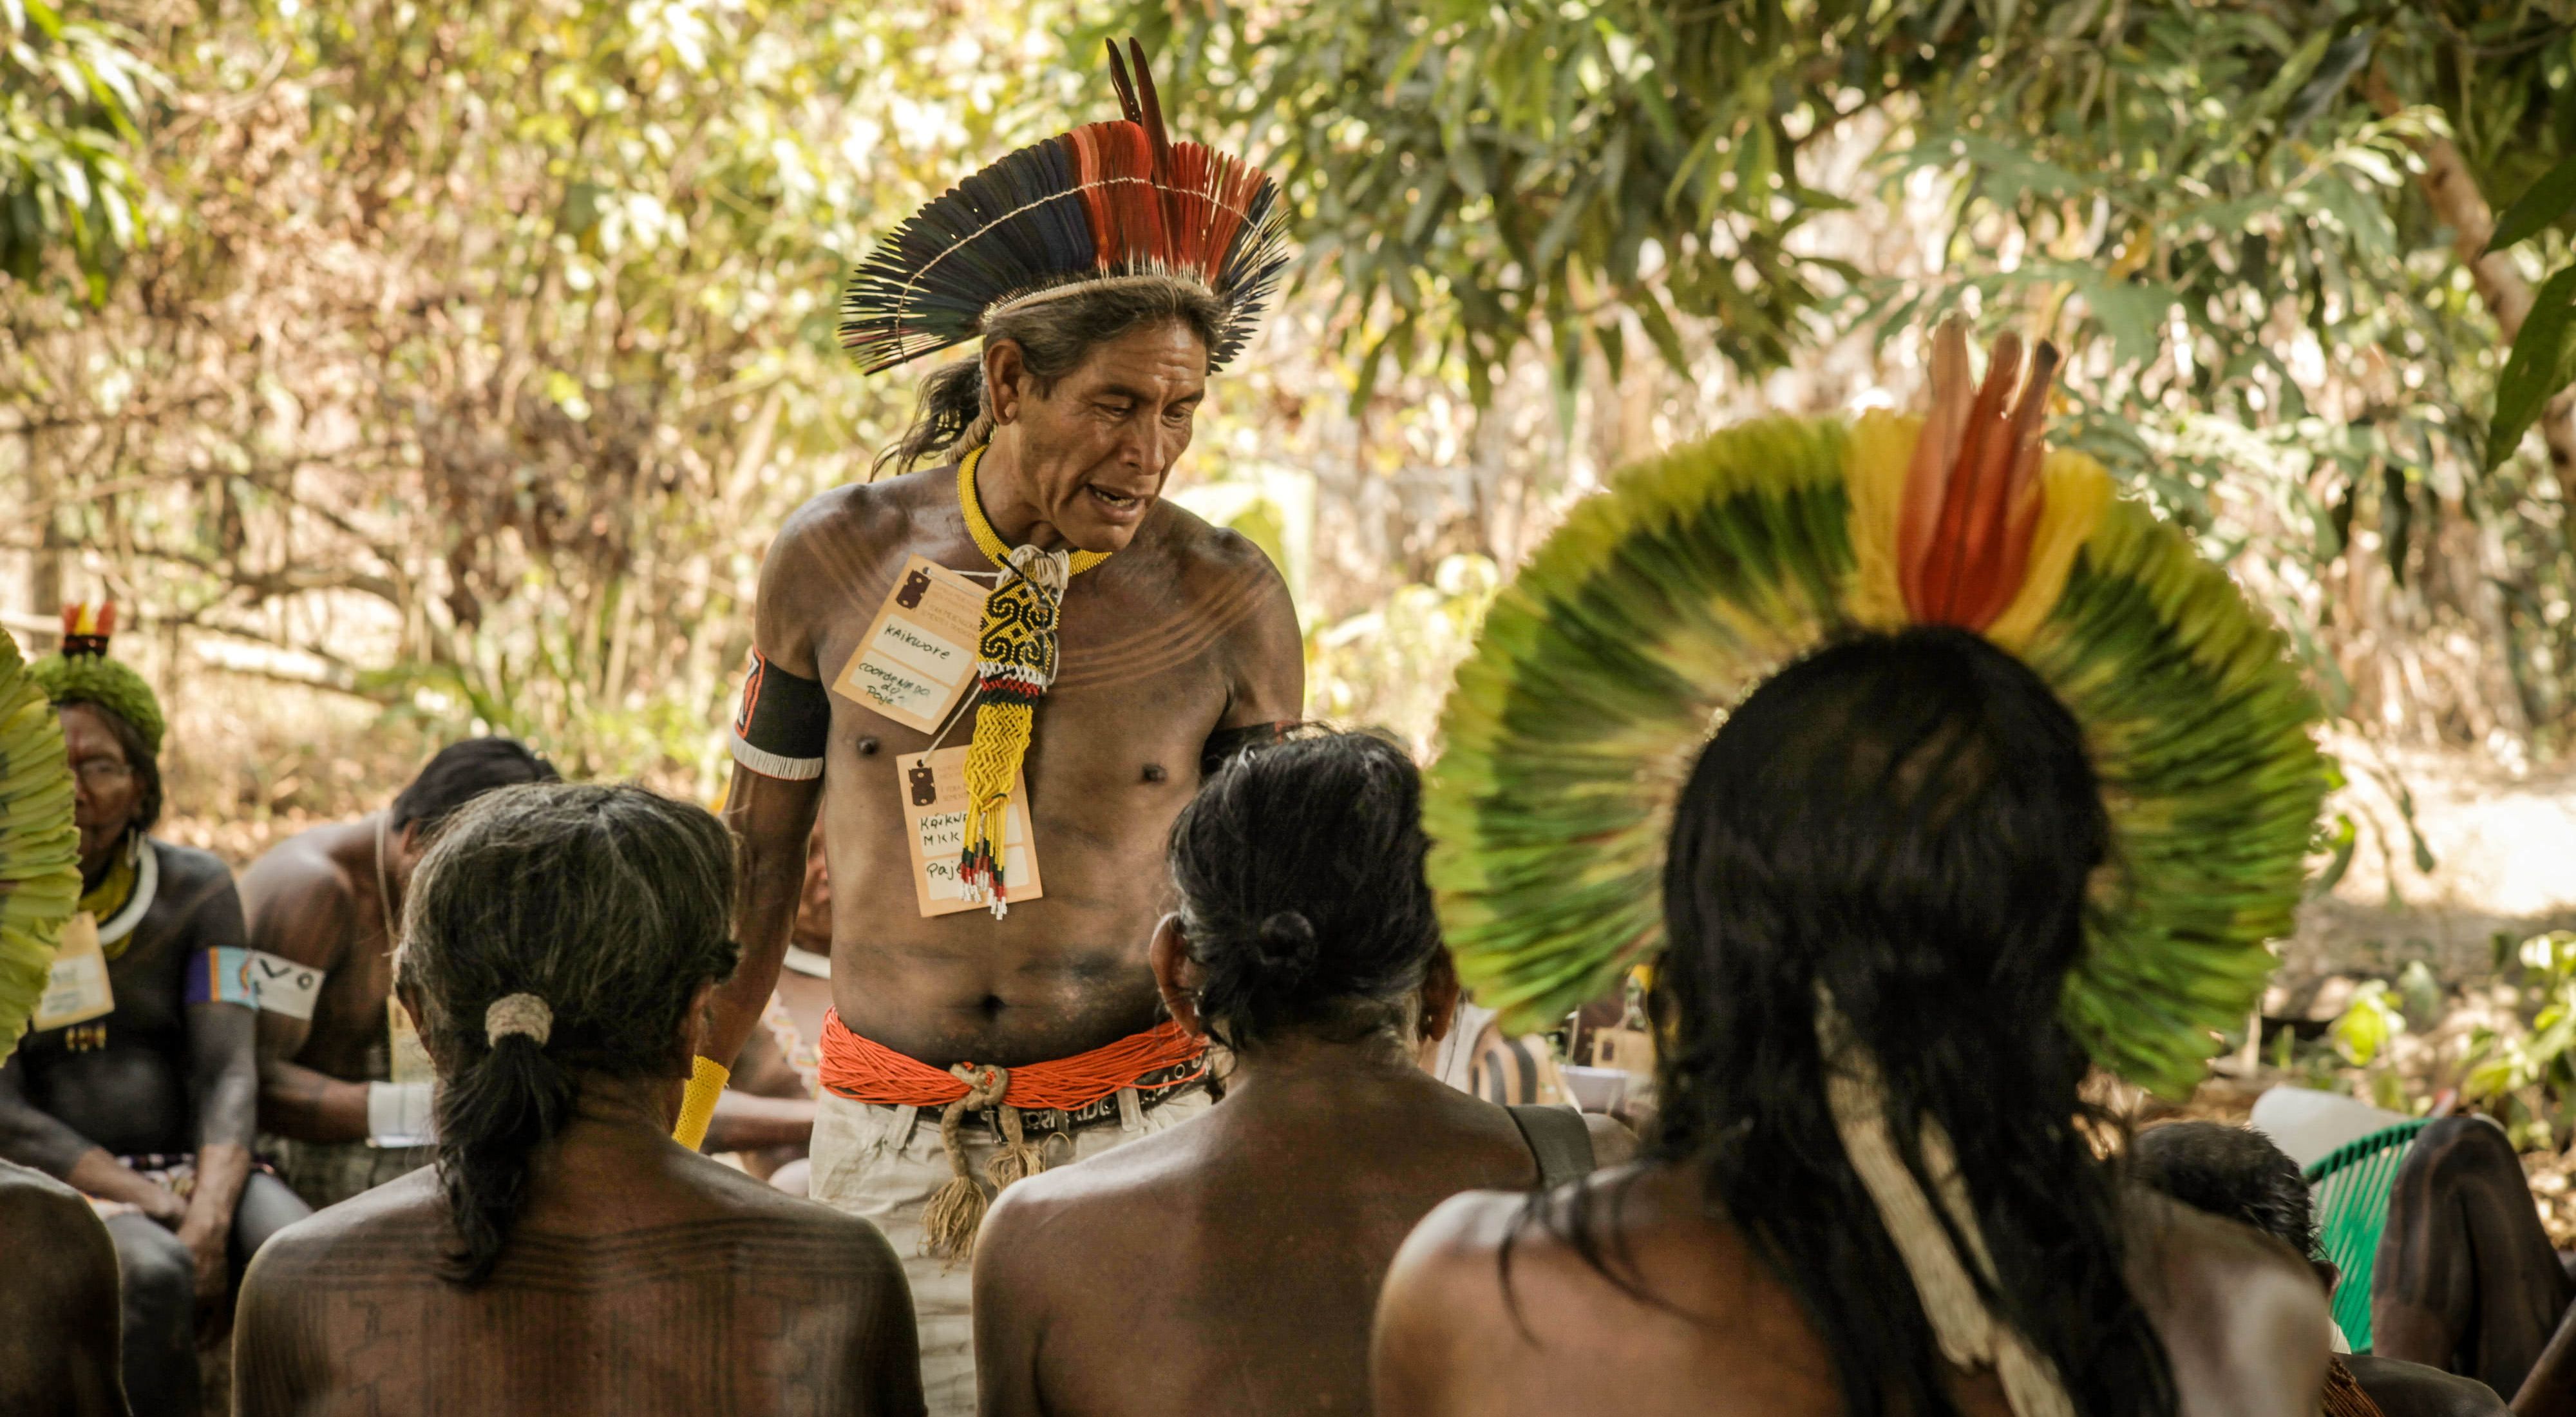 The Tribals Of India: Aboriginal Peoples Without Land